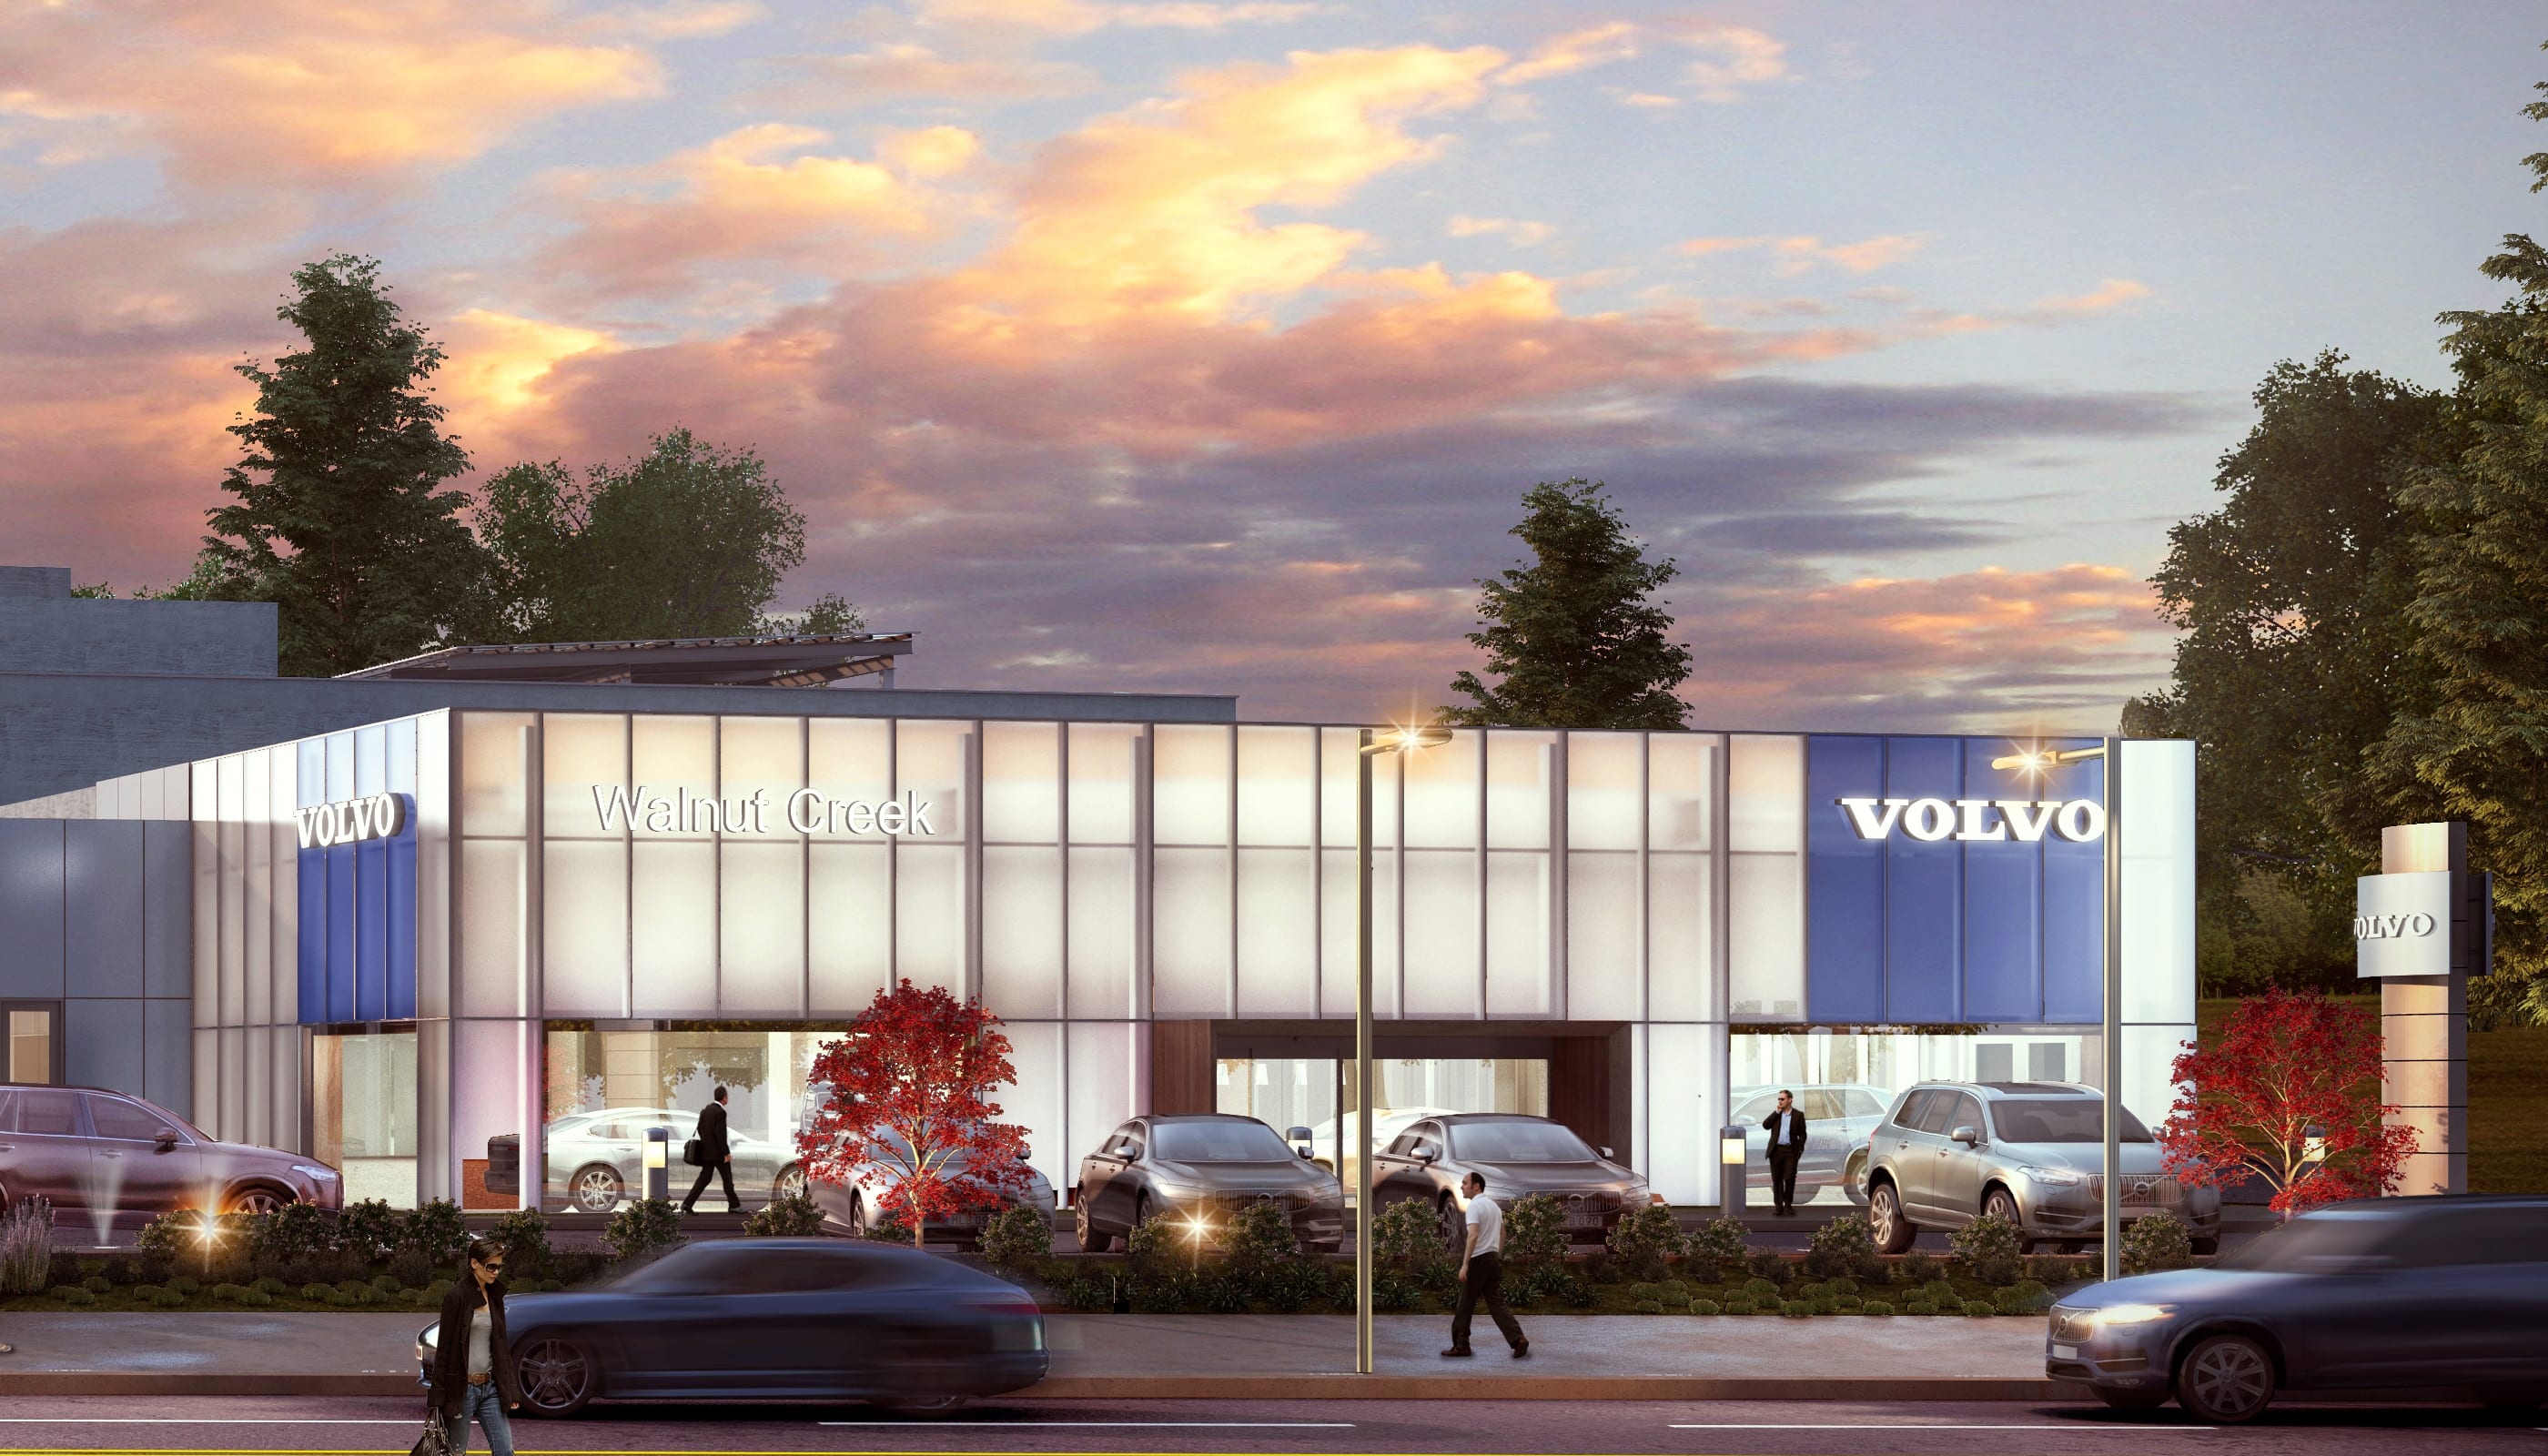 Volvo - Commercial Architecture